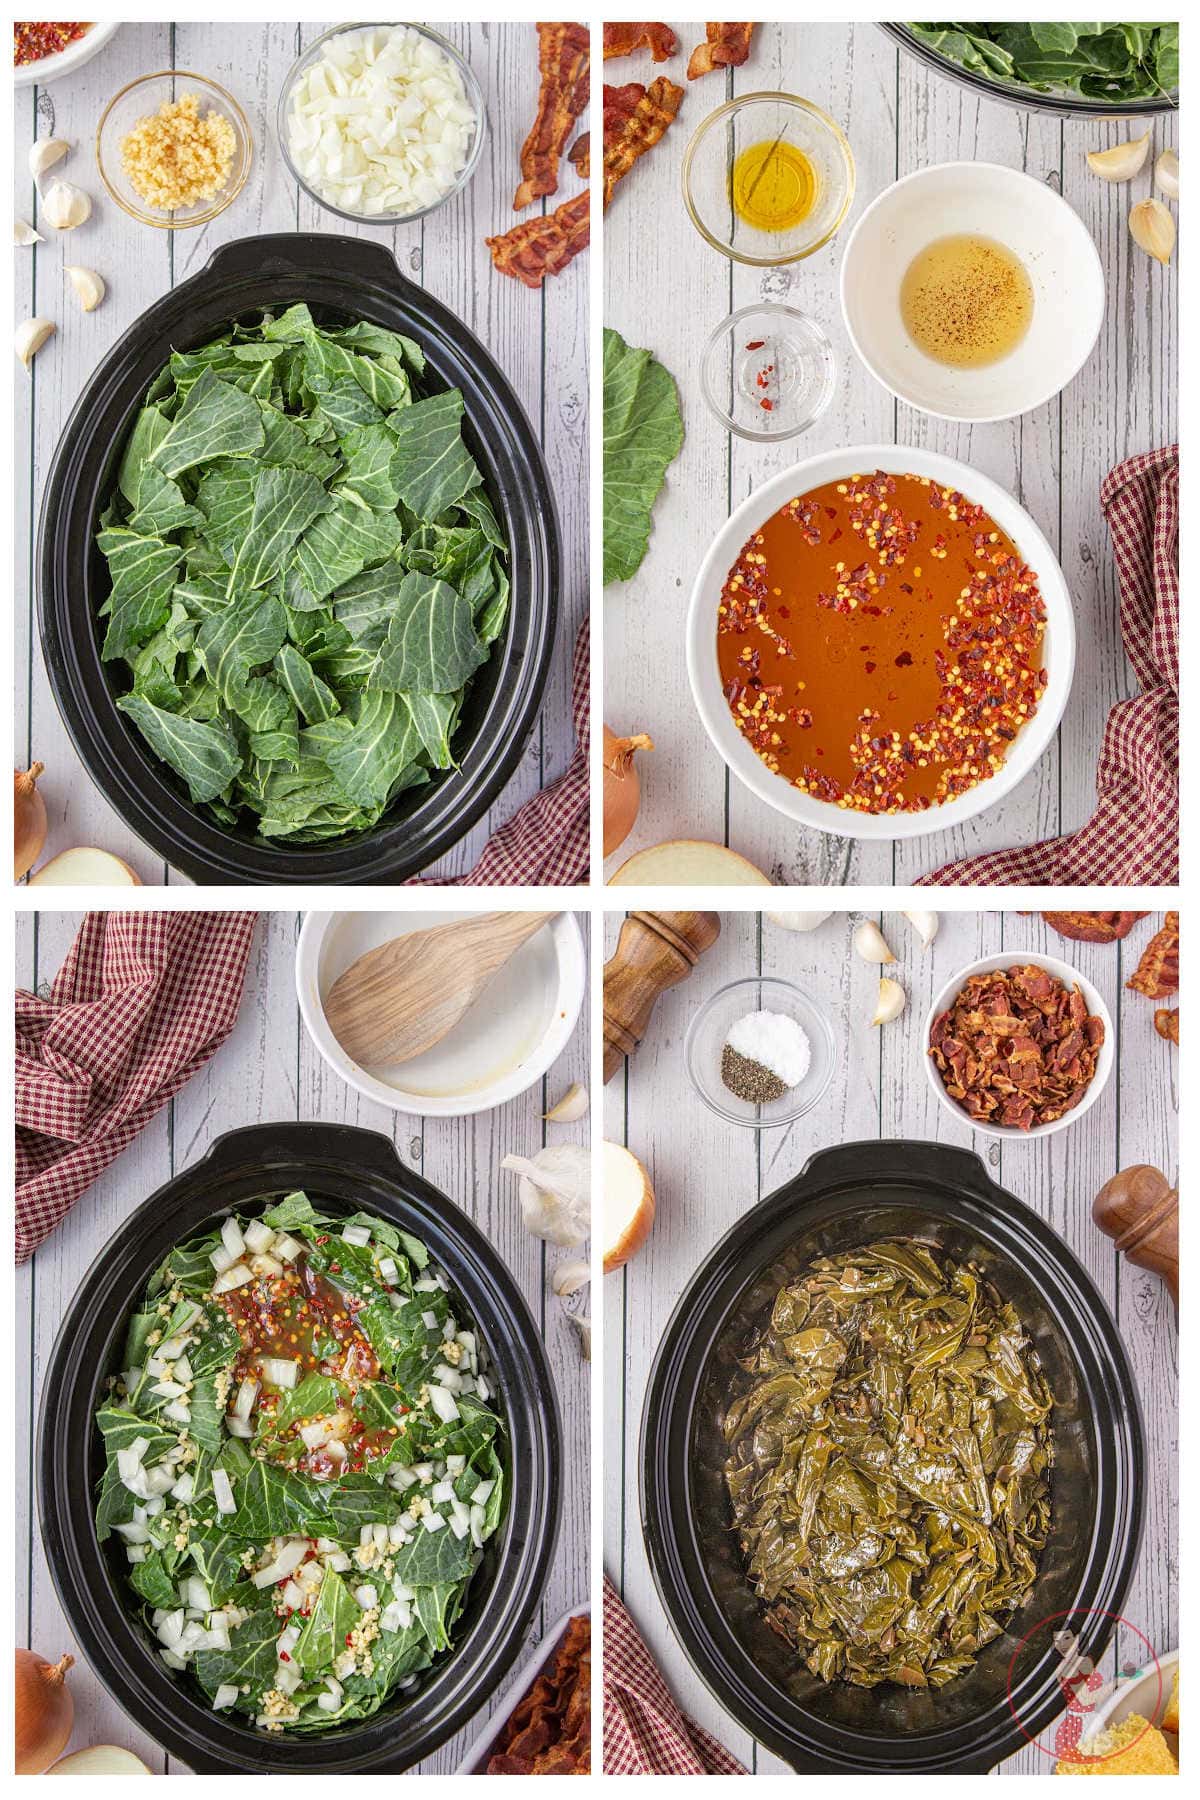 Step by step images showing how to make the collard greens.